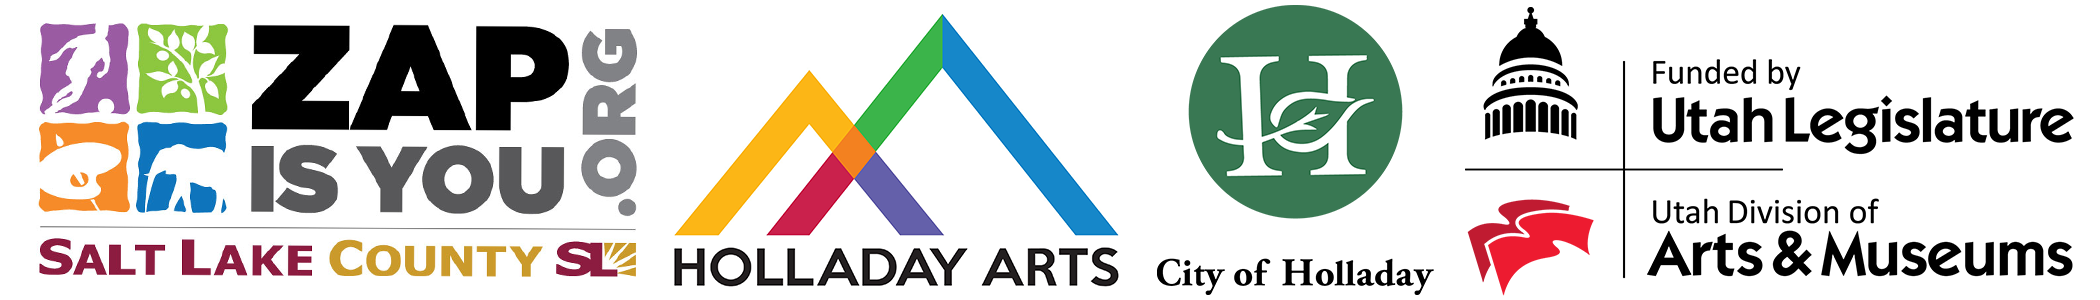 Logos for ZAP, Holladay Arts, the city of Holladay, the Utah Legislature, and the Utah division of Arts & Museums.